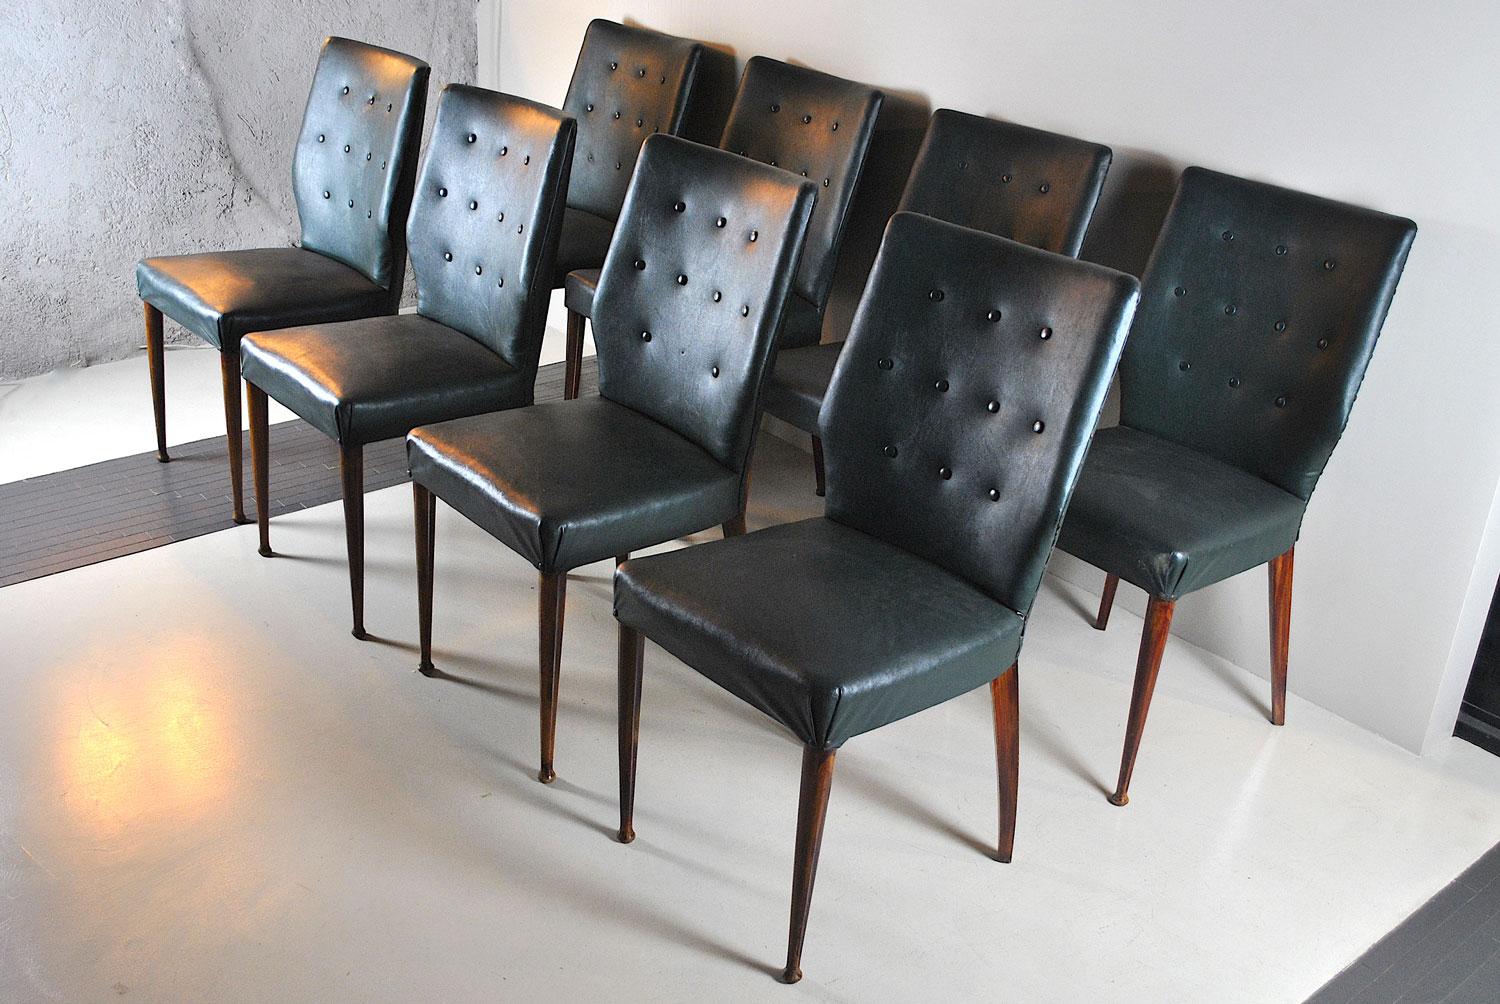 Italian Midcentury Set of Eighty 1960s Chairs in Green Faux Leather In Fair Condition For Sale In bari, IT